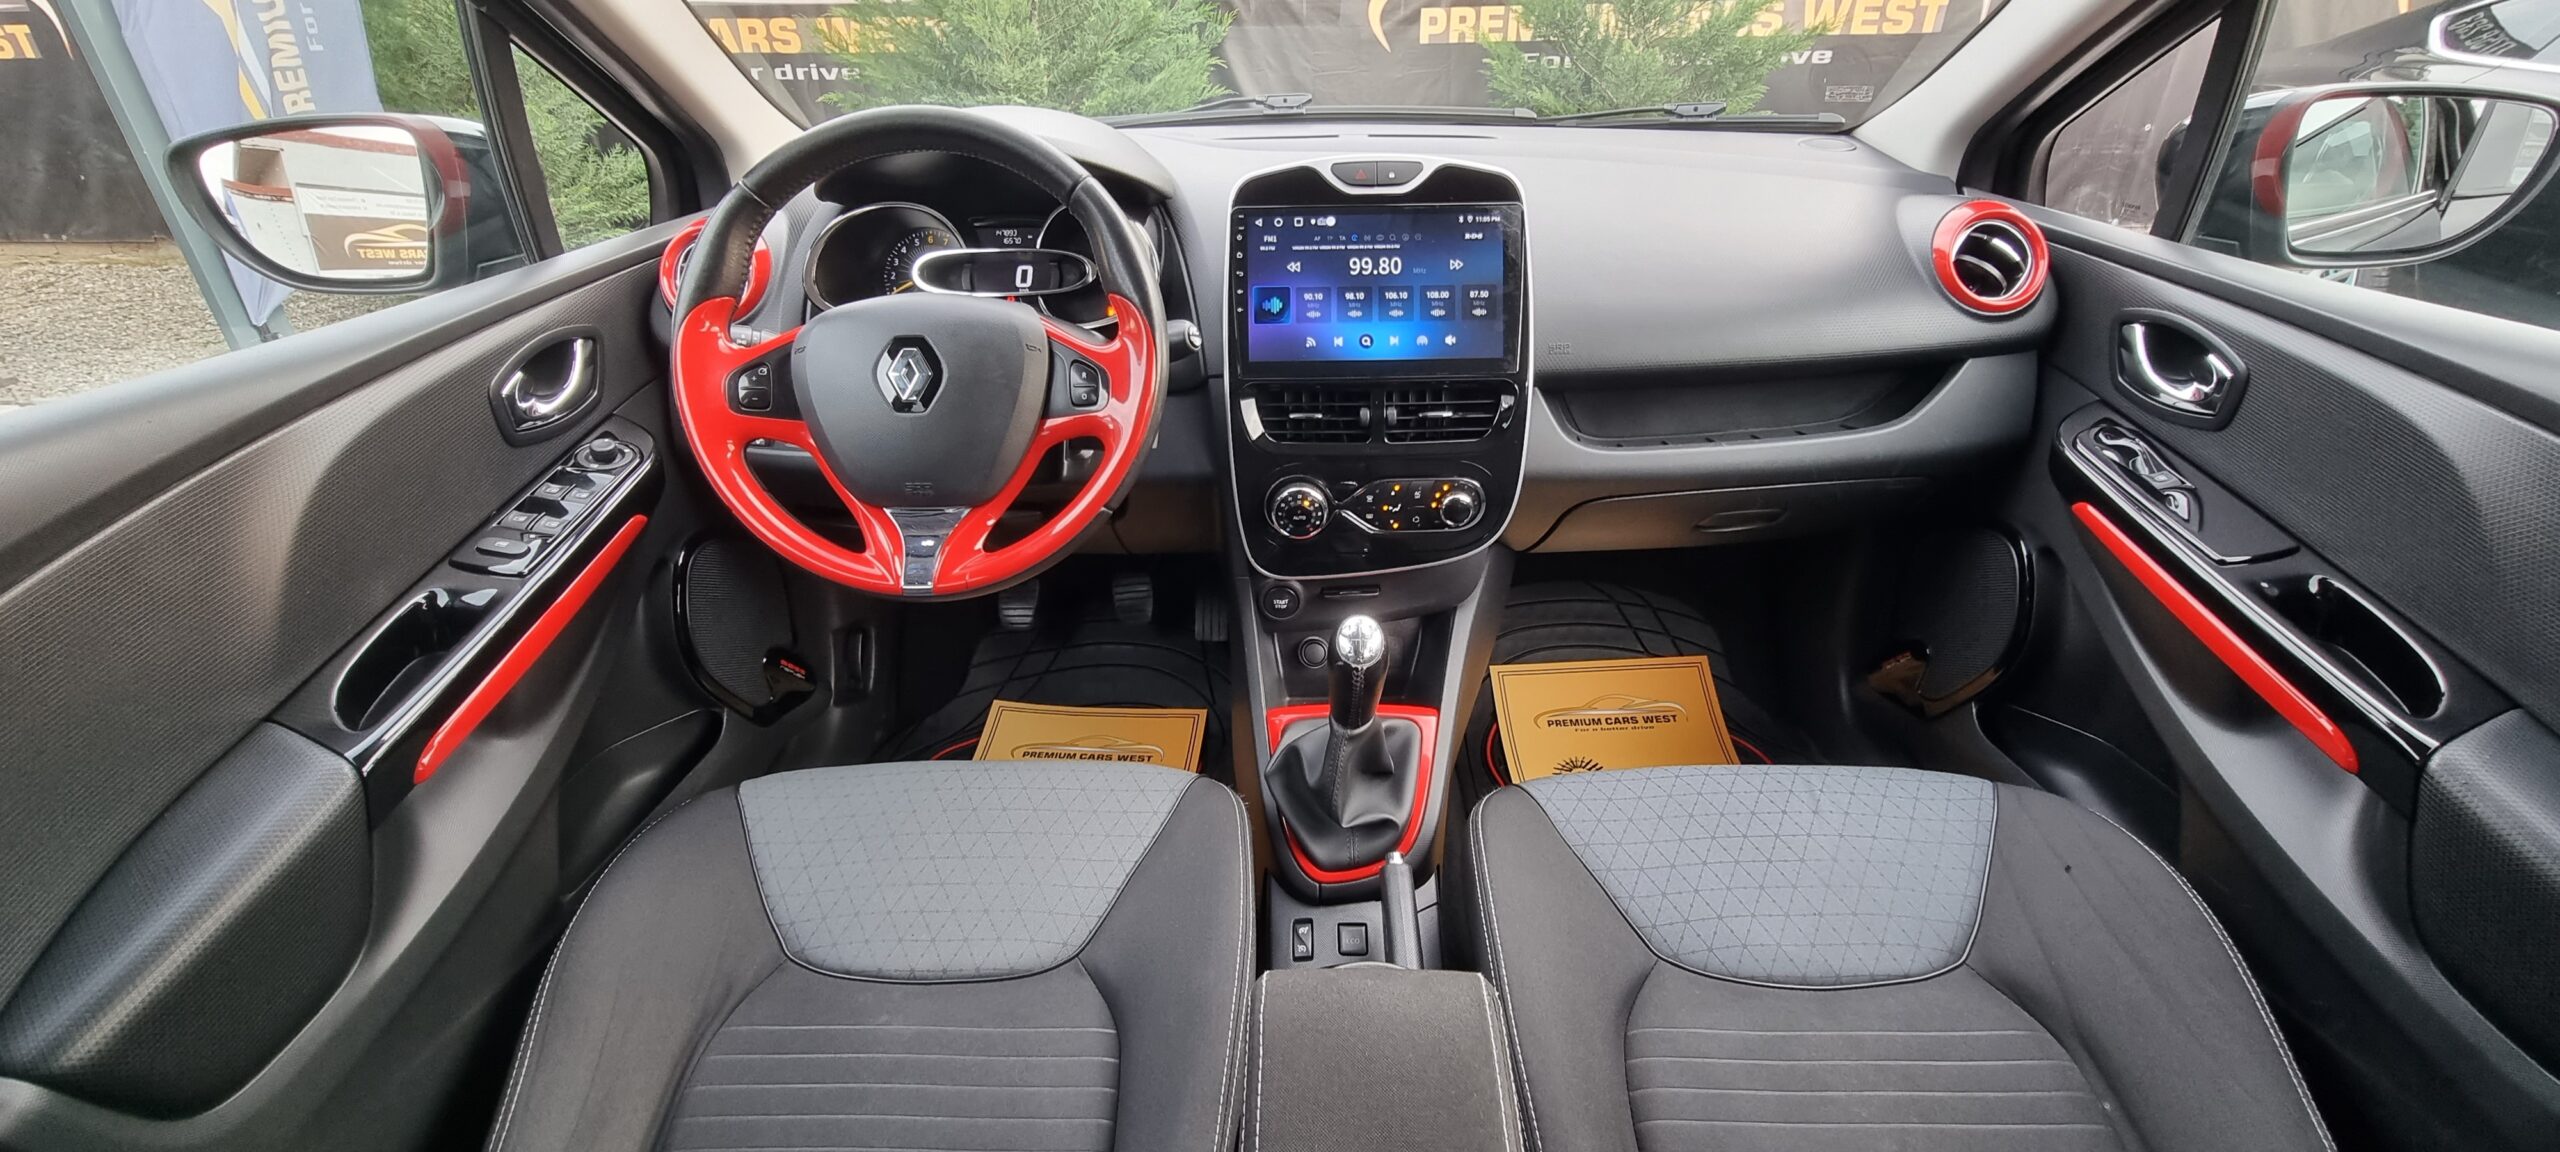 RENAULT CLIO, 0.9 TCE, 90 CP, EURO 5, AN 2013